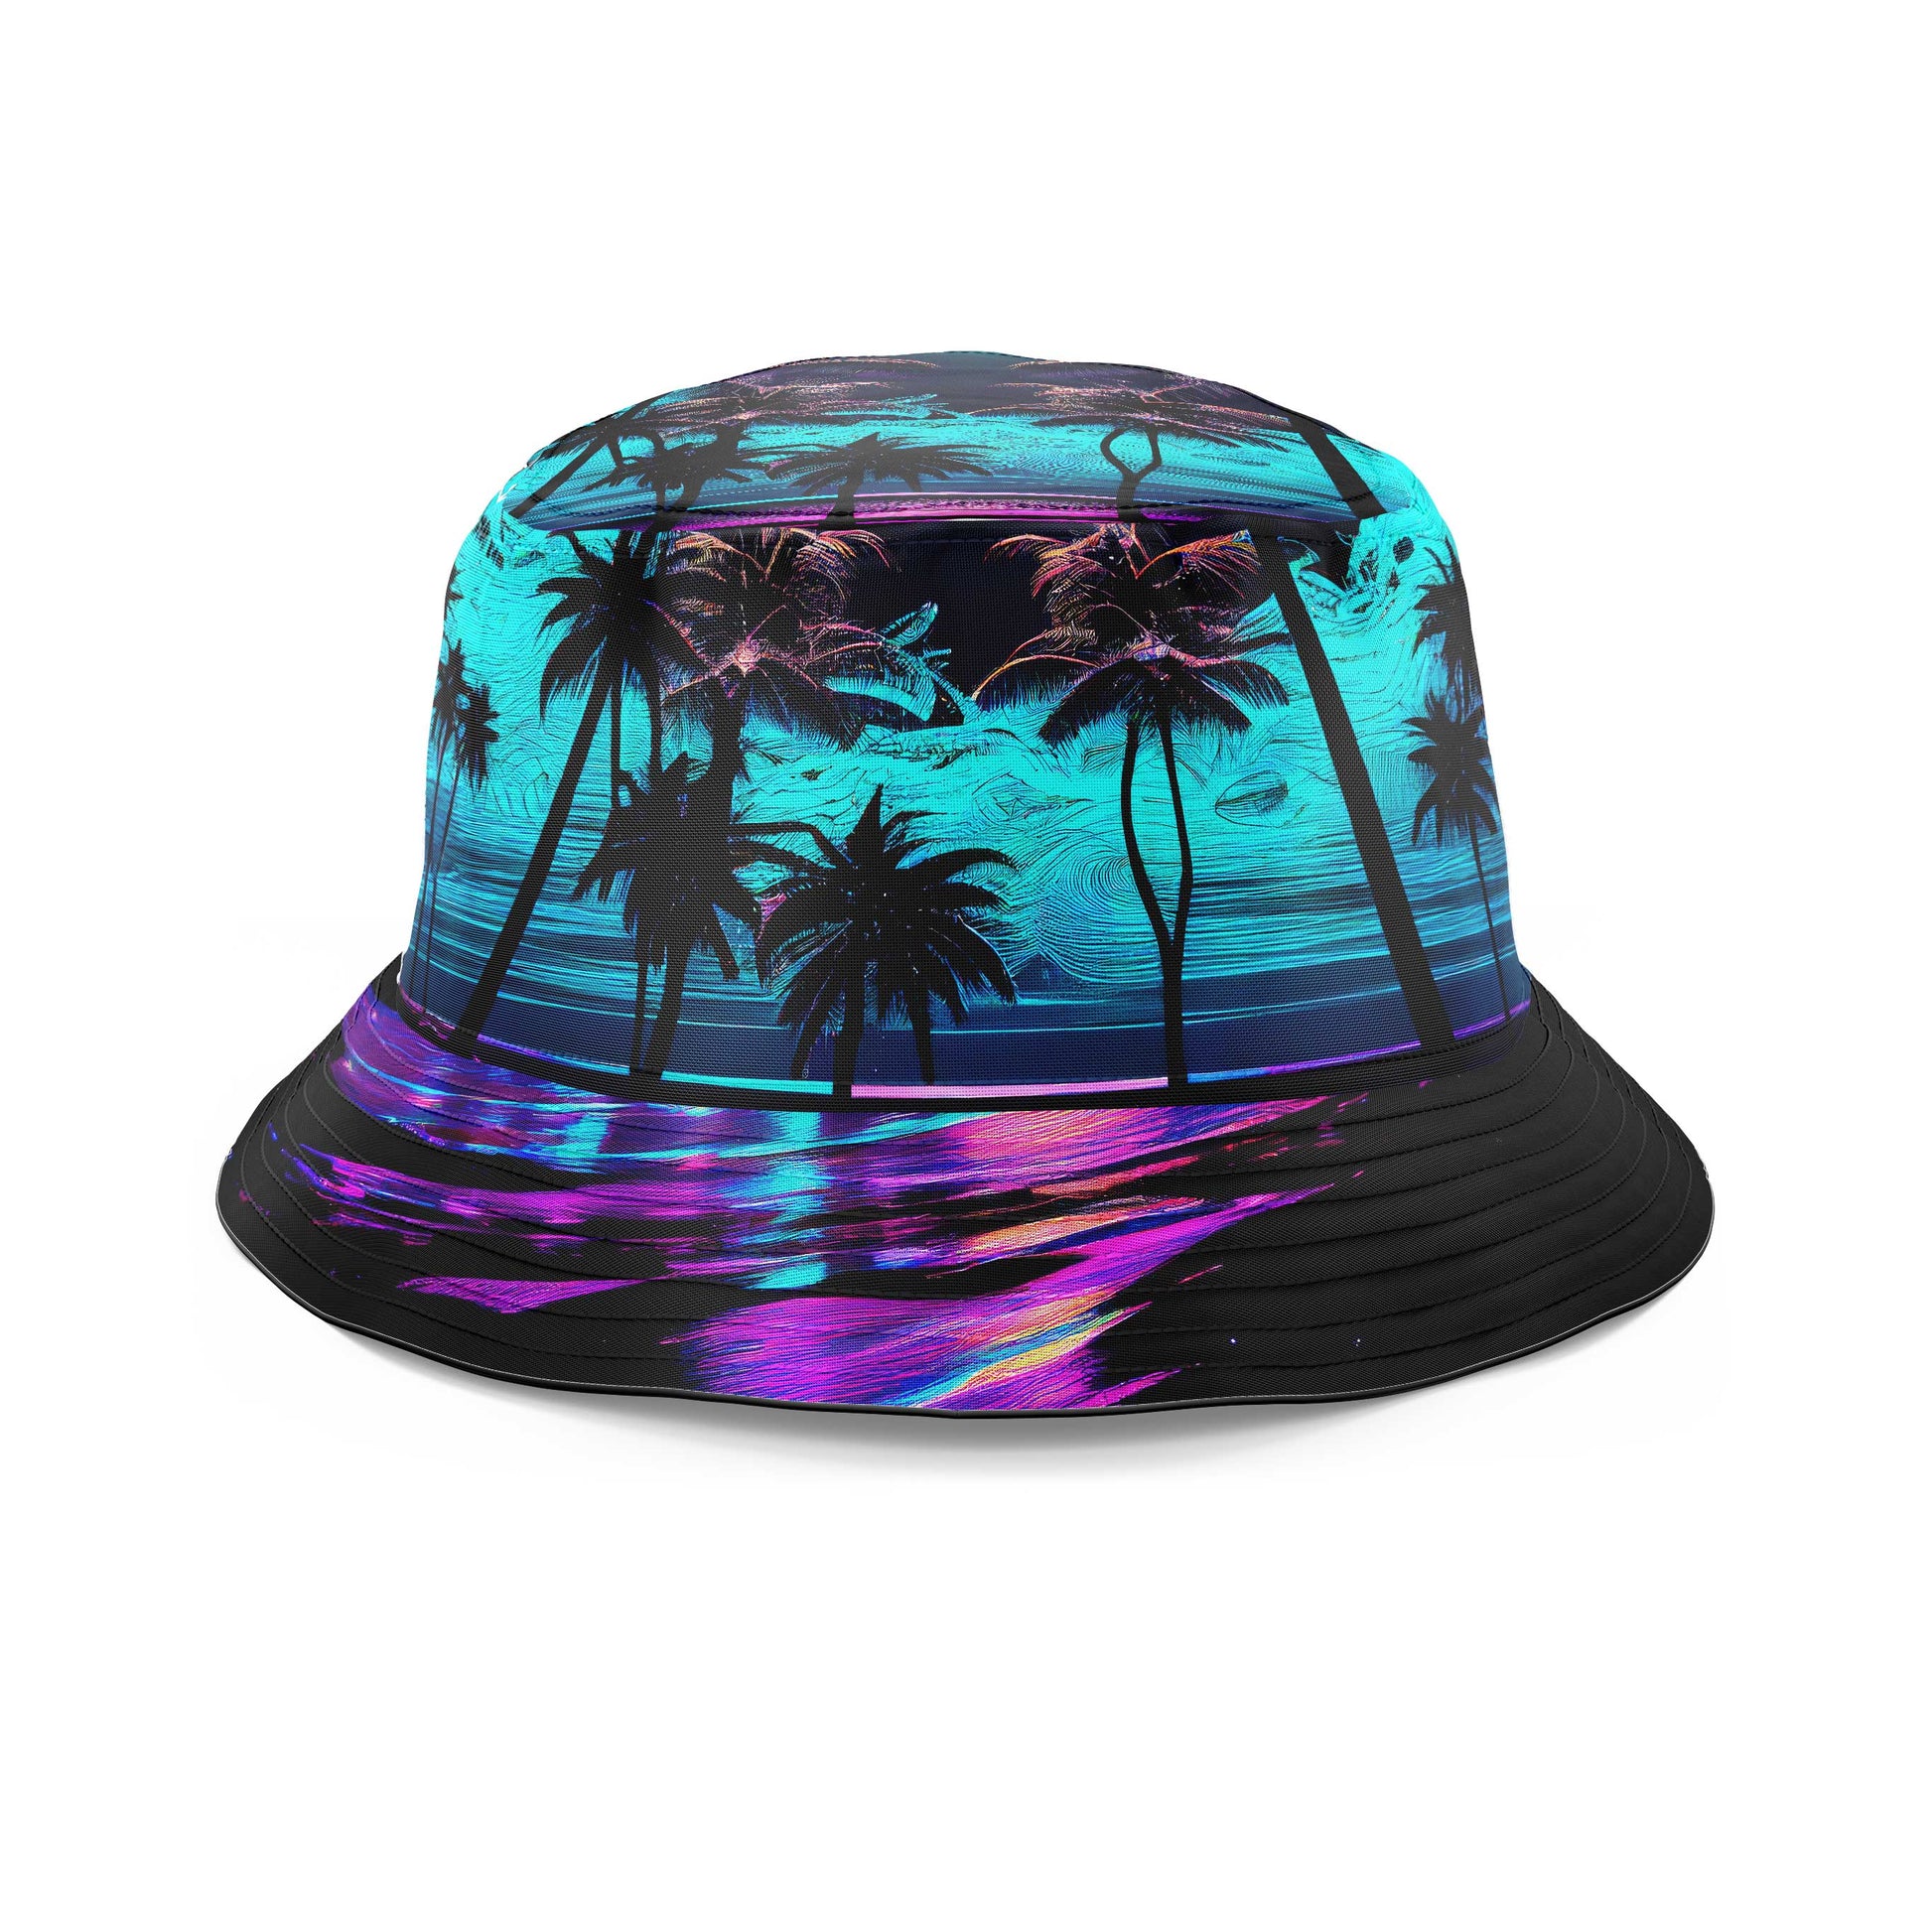 Spellbound T-Shirt and Shorts with Bucket Hat Combo, iEDM, | iEDM